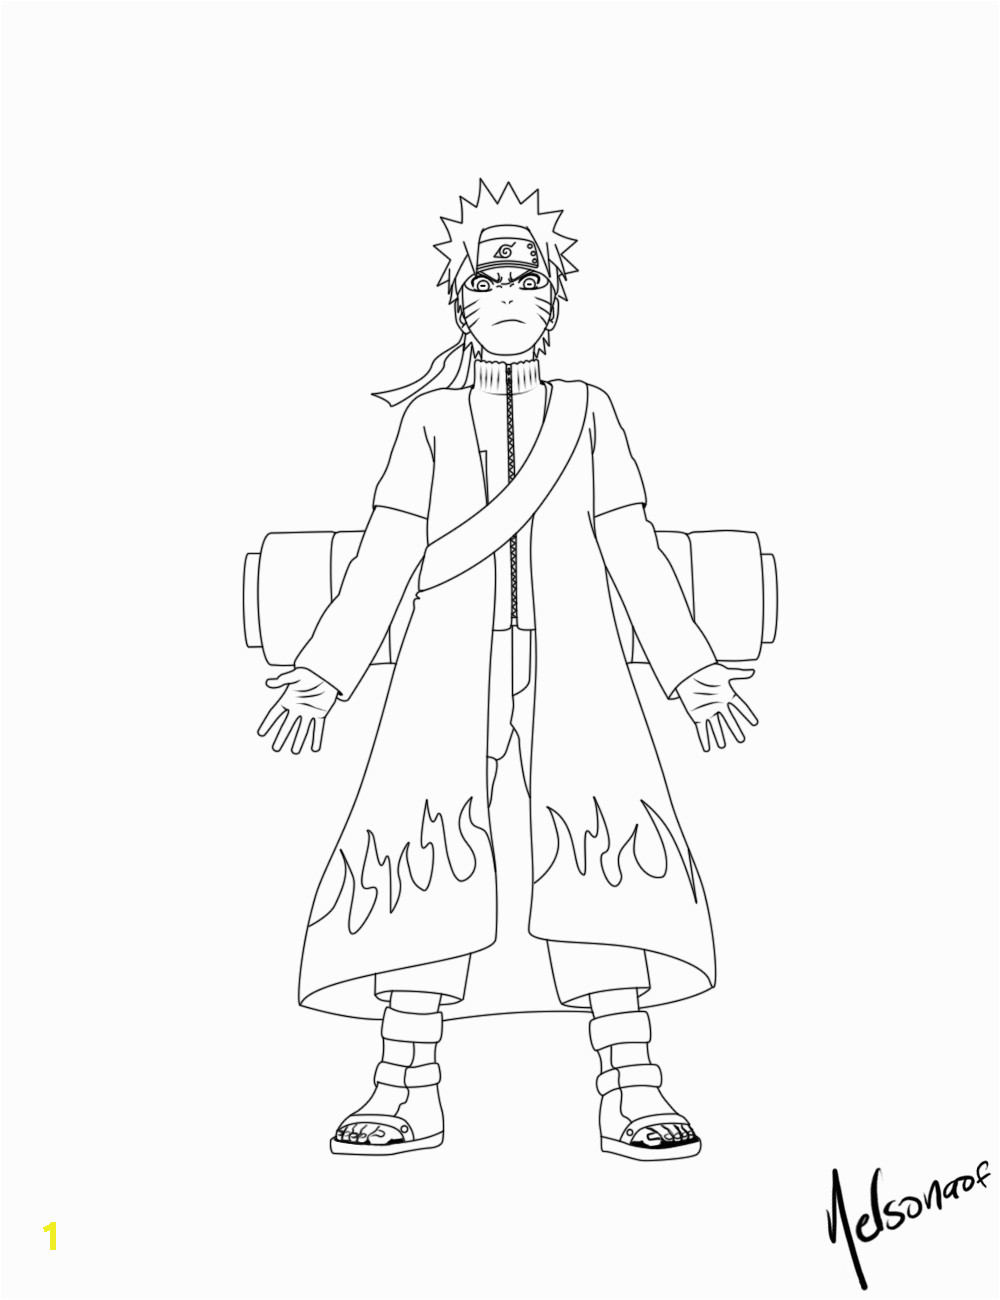 Naruto Shippuden Coloring Pages to Print Naruto Shippuden Coloring Page Coloring Home